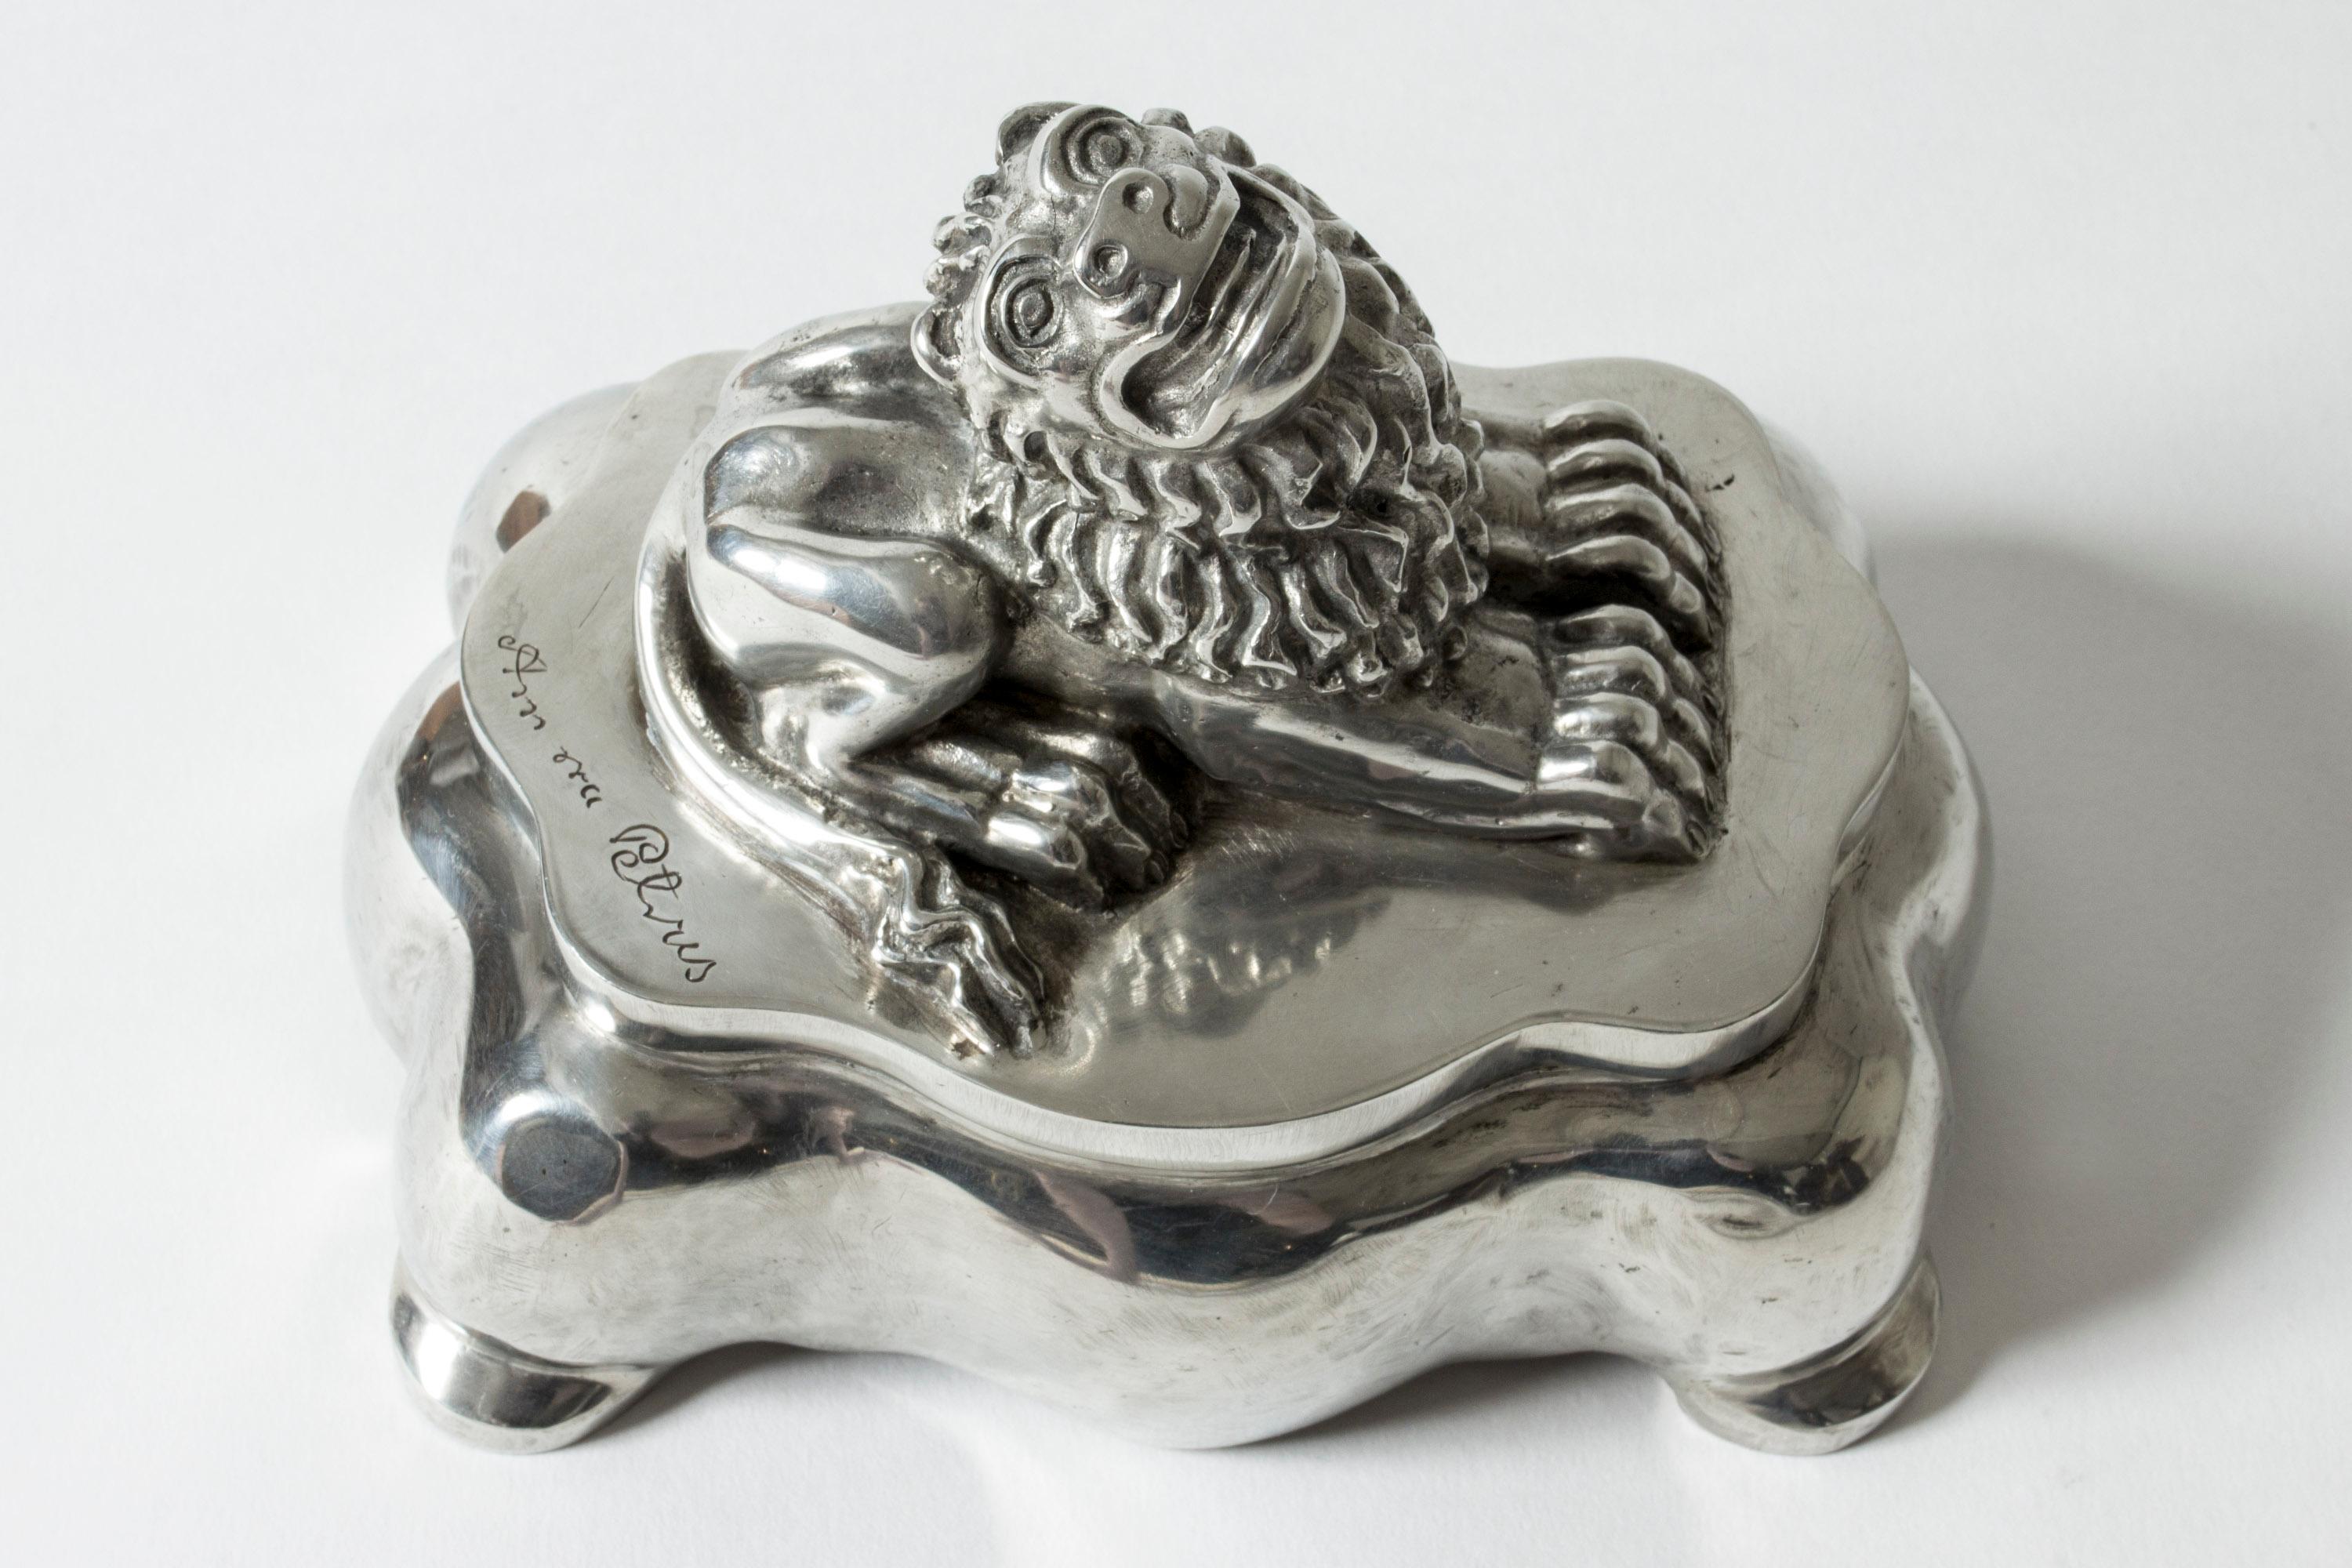 Pewter inkwell by Anna Petrus, designed in the period 1925-1927, when Petrus worked for Herman Bergman. Adorned with the expressive lion that is one of Petrus’ signature designs. Loose glass insets in the indentures made for ink.

Anna Petrus was